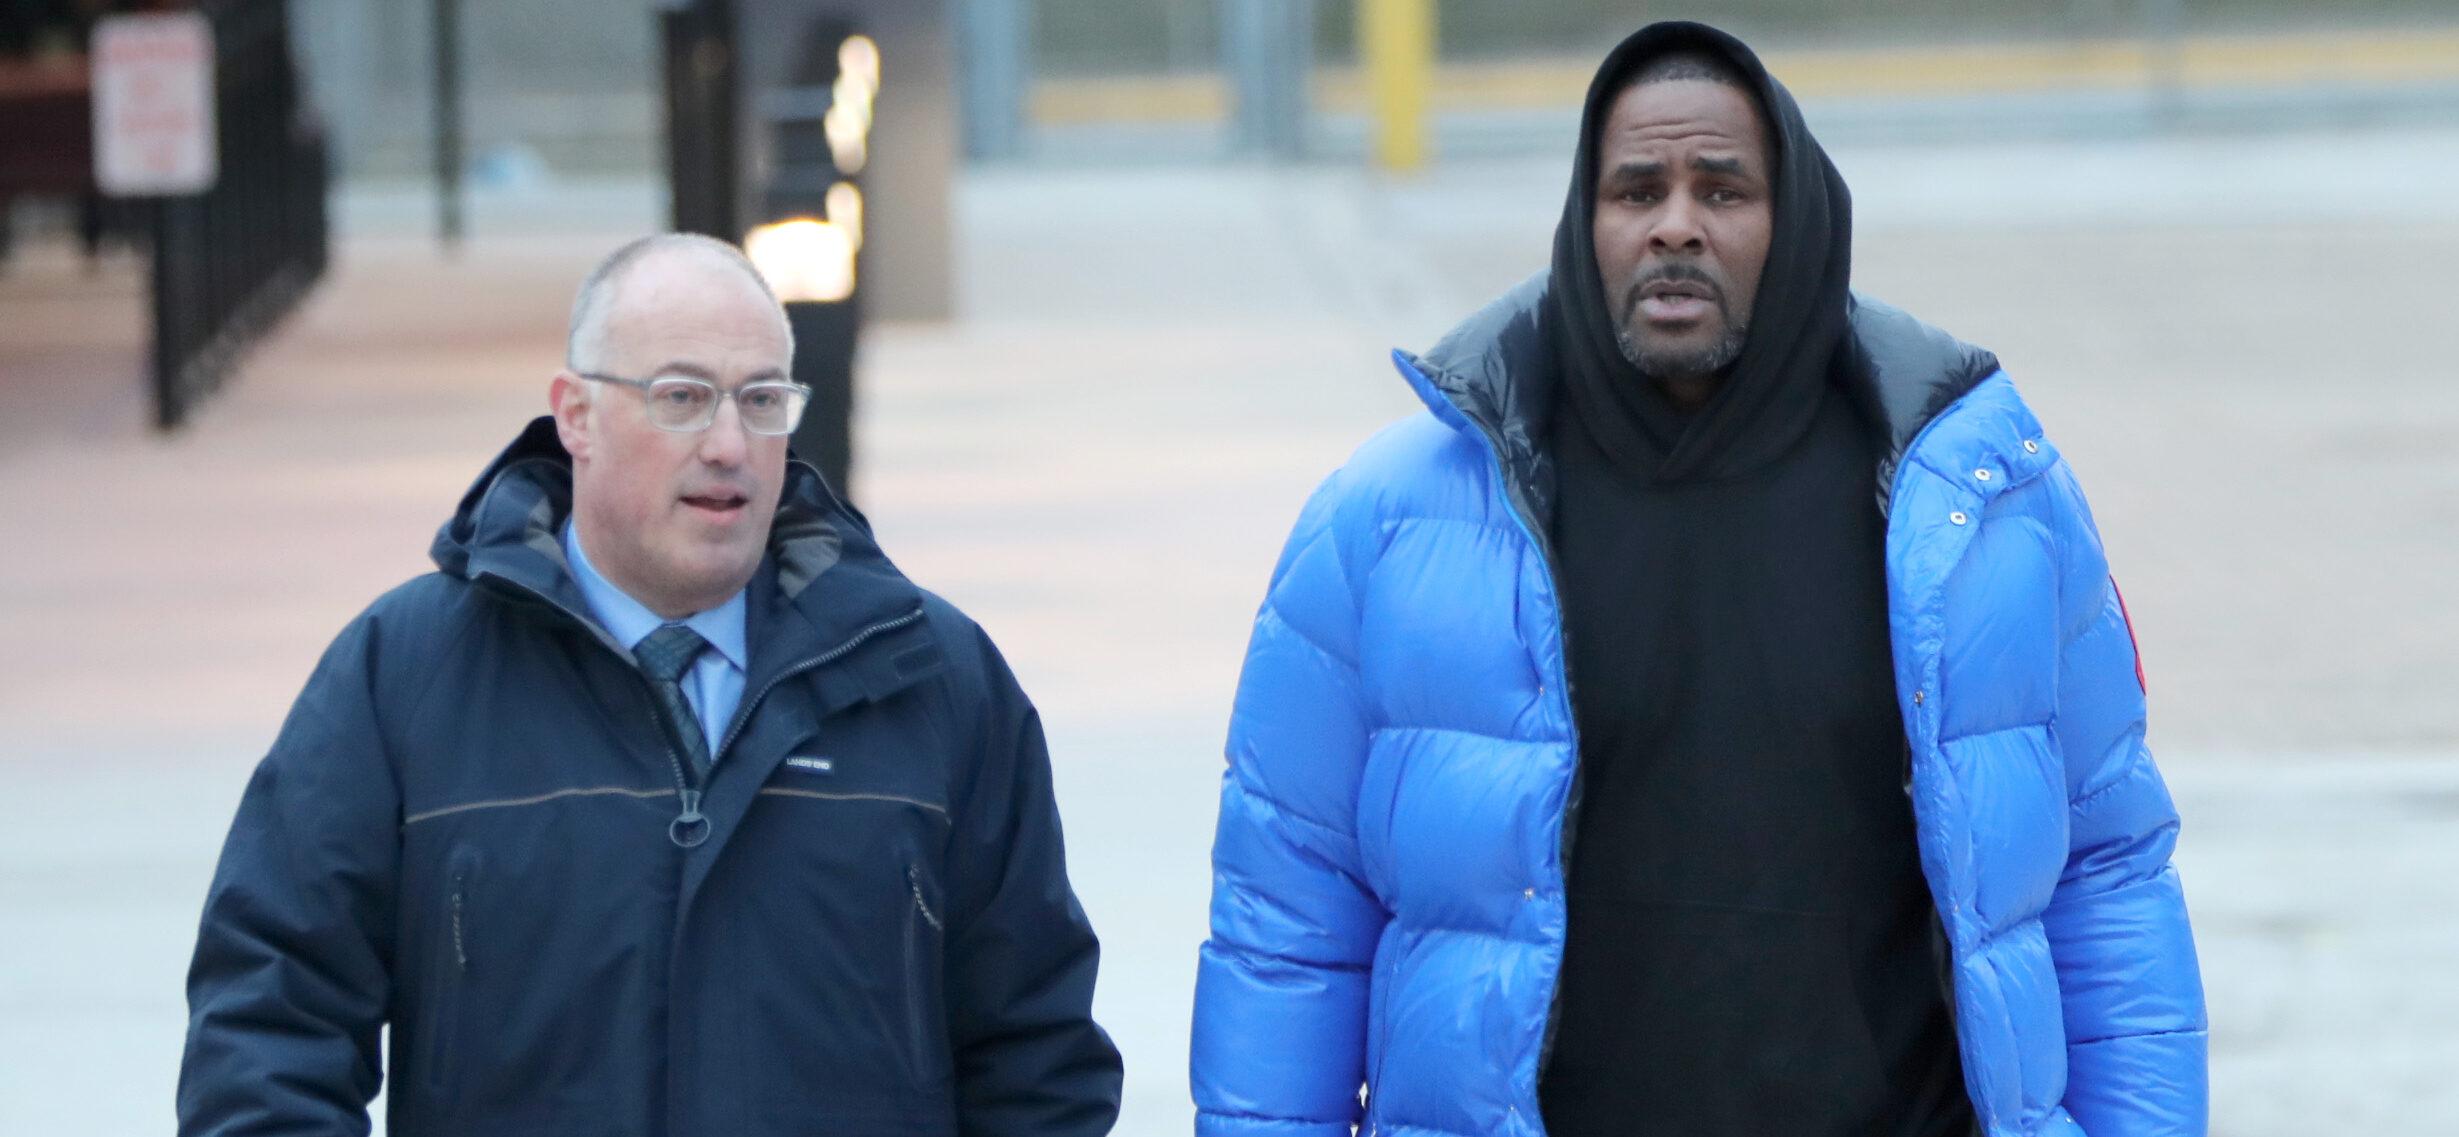 R. Kelly Gives Exclusive Interview From Prison, Denies Recent Allegations